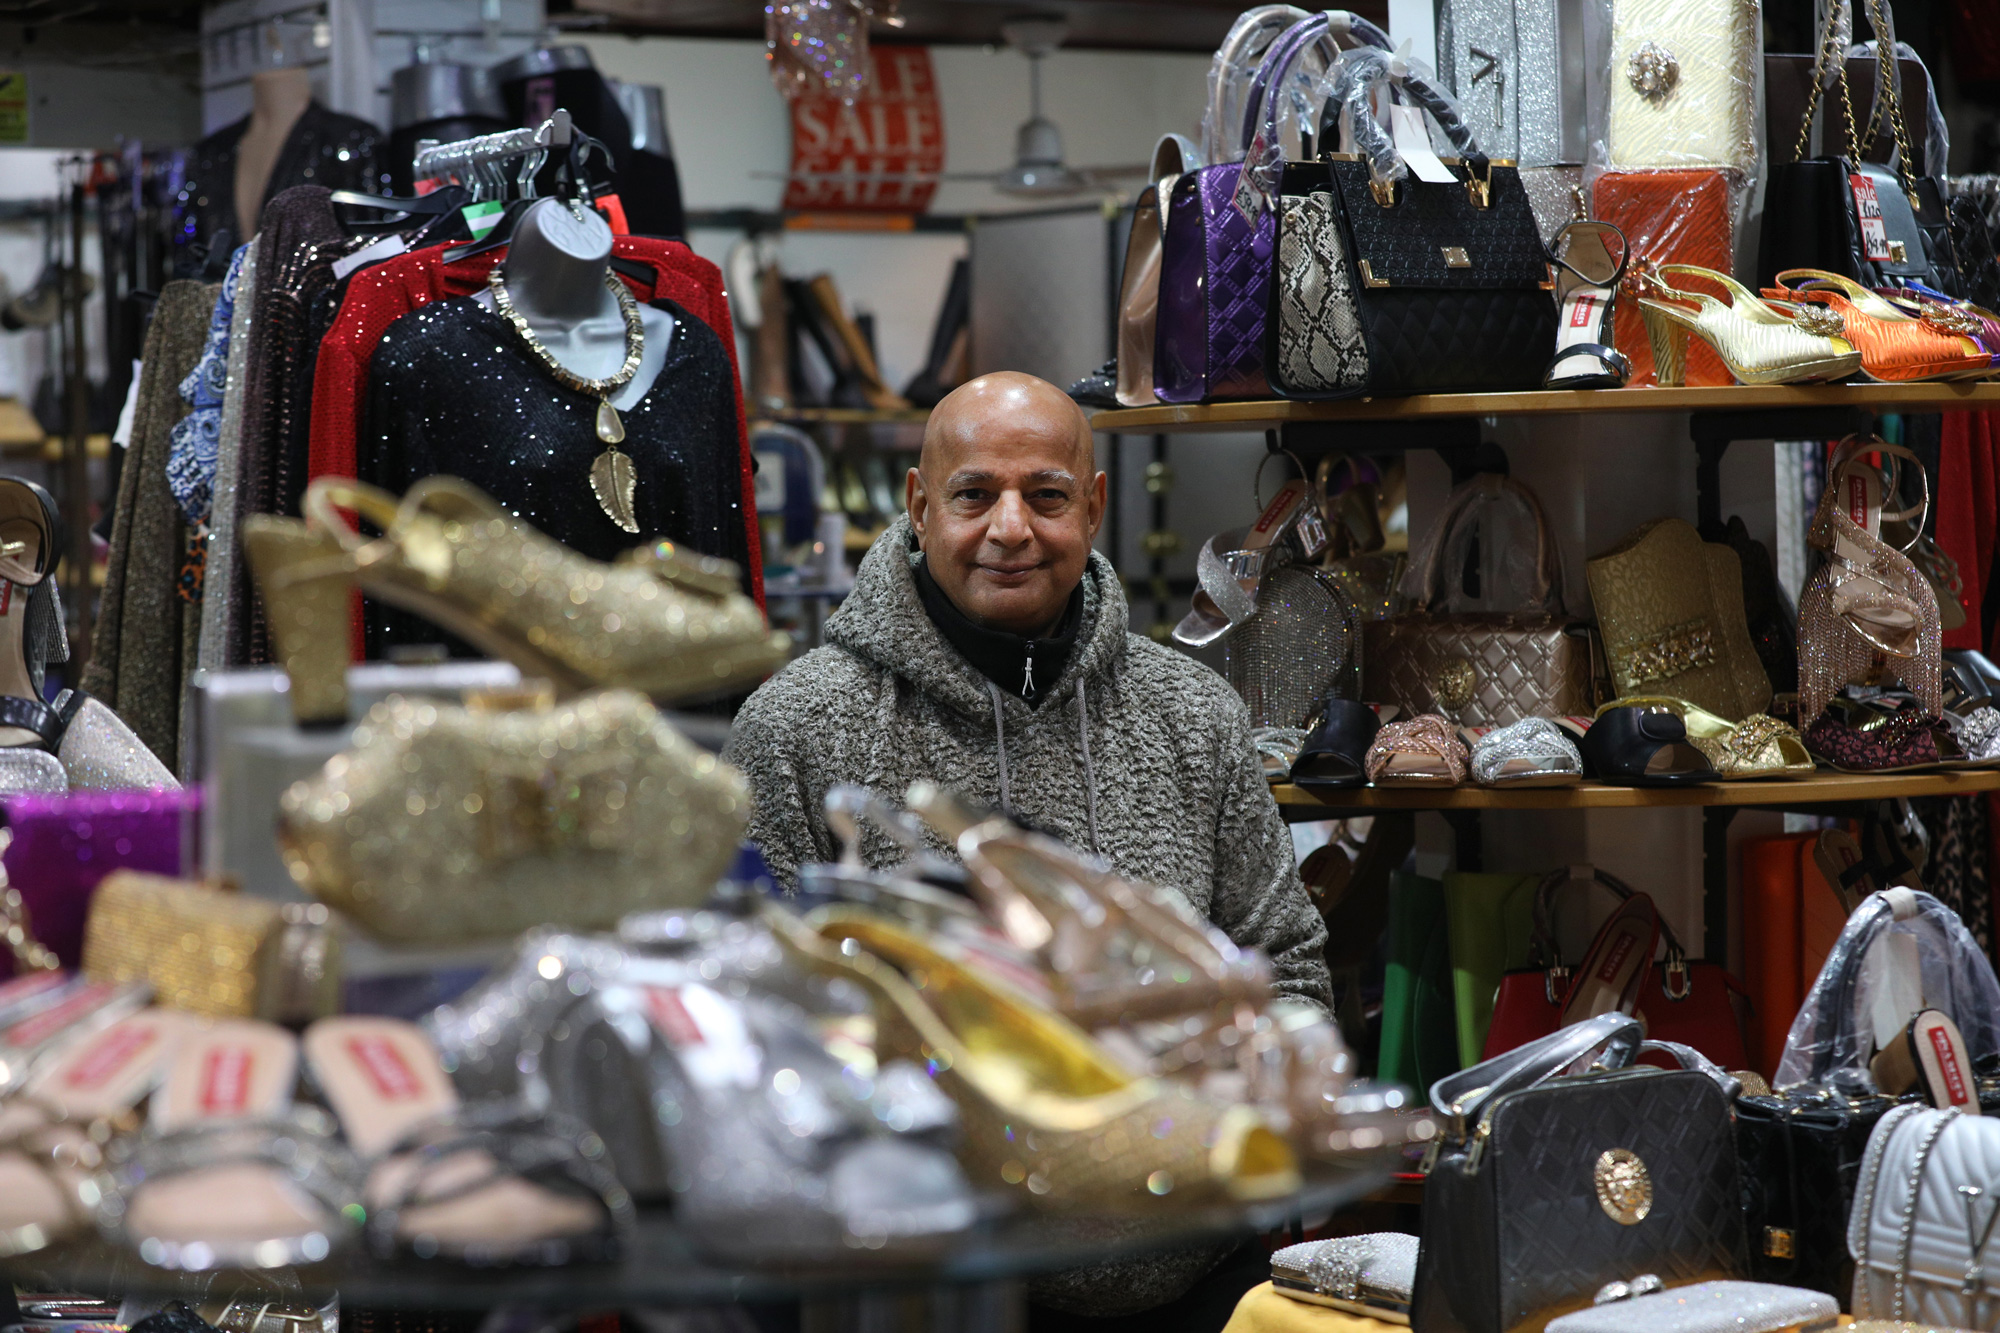 Portrait of a man in a women's fashion shop, surrounded by displays of shoes, clothing and accessories.